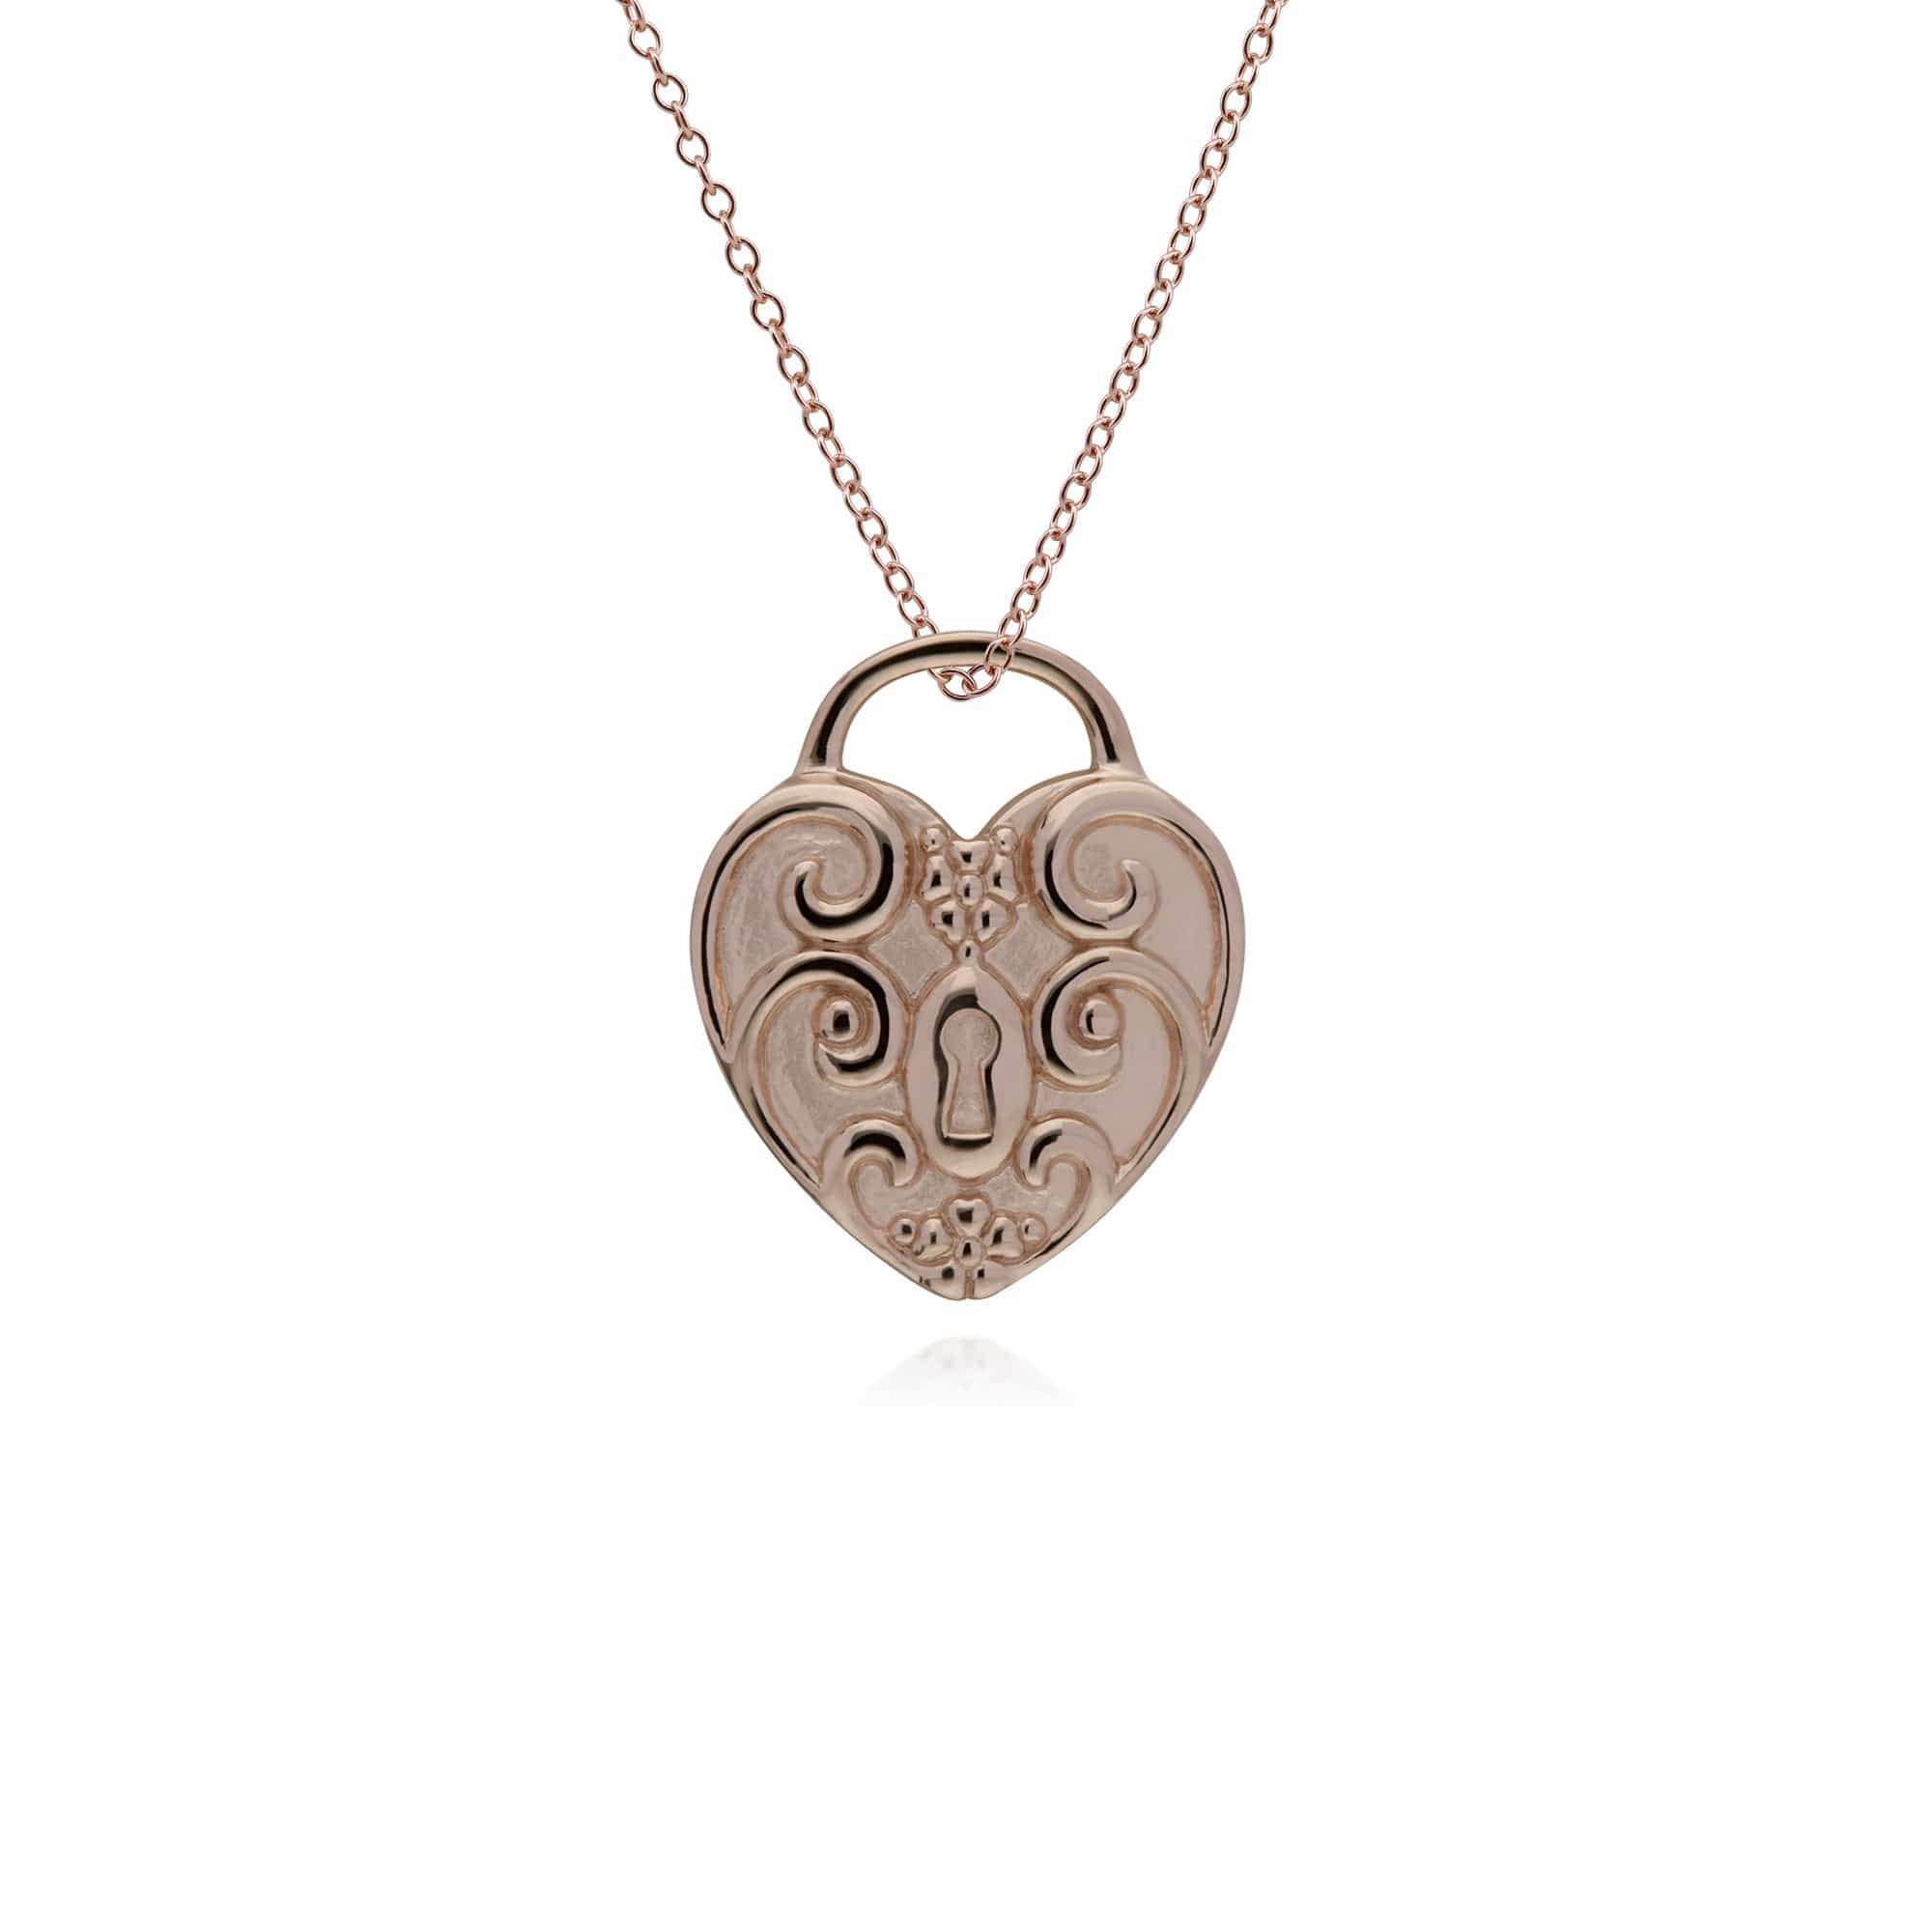 270P026712925-270P026501925 Classic Swirl Heart Lock Pendant & Jade Big Key Charm in Rose Gold Plated 925 Sterling Silver 3